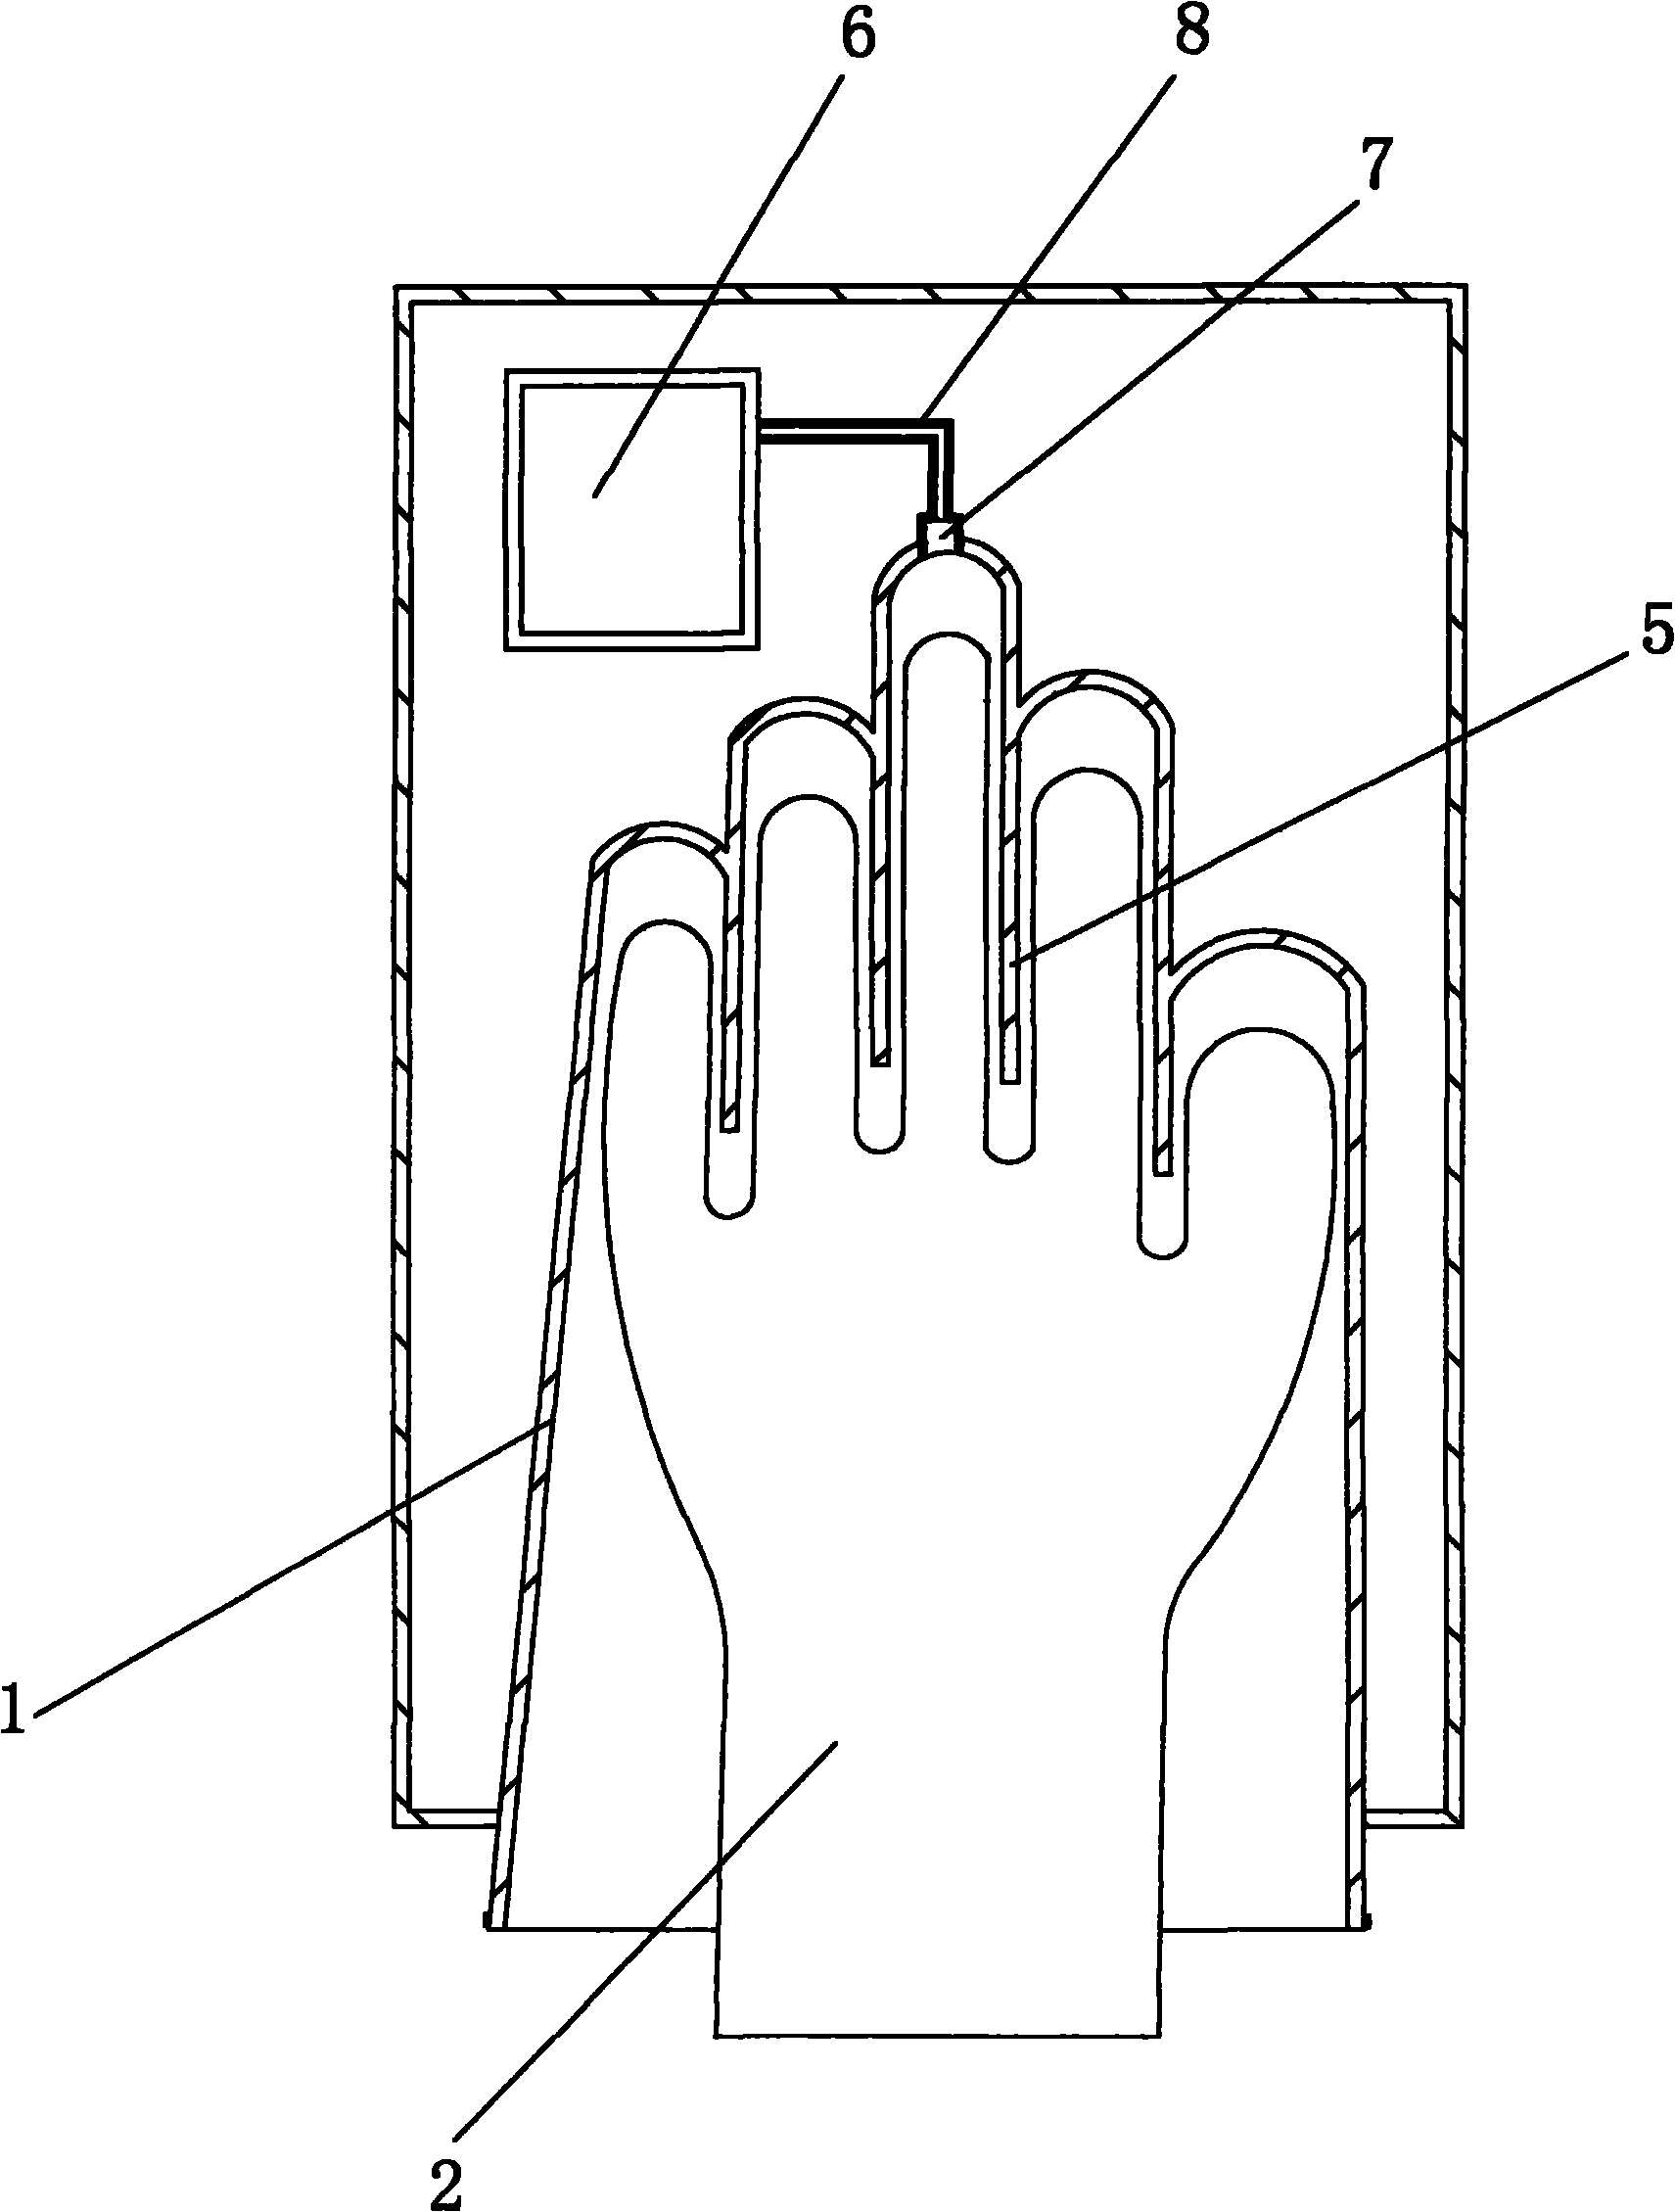 Latex glove wearing device and method for wearing latex gloves by using same